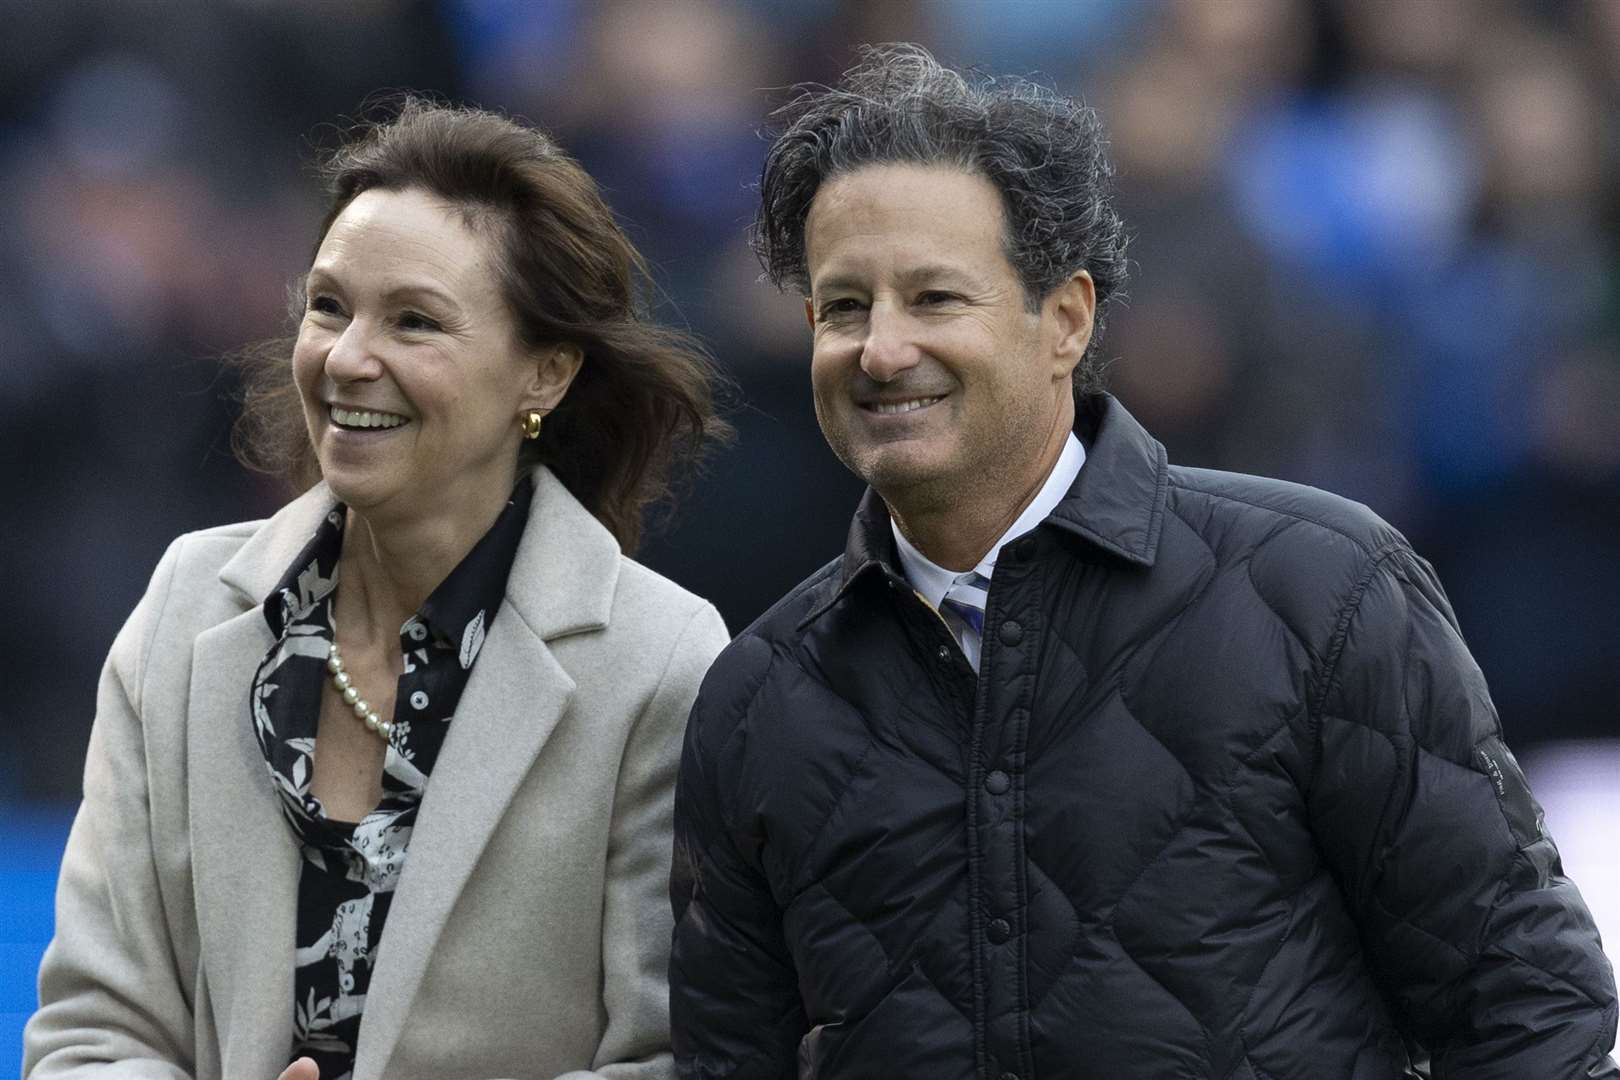 Brad Galinson and wife Shannon at last week's FA Cup game between Gillingham and Leicester City